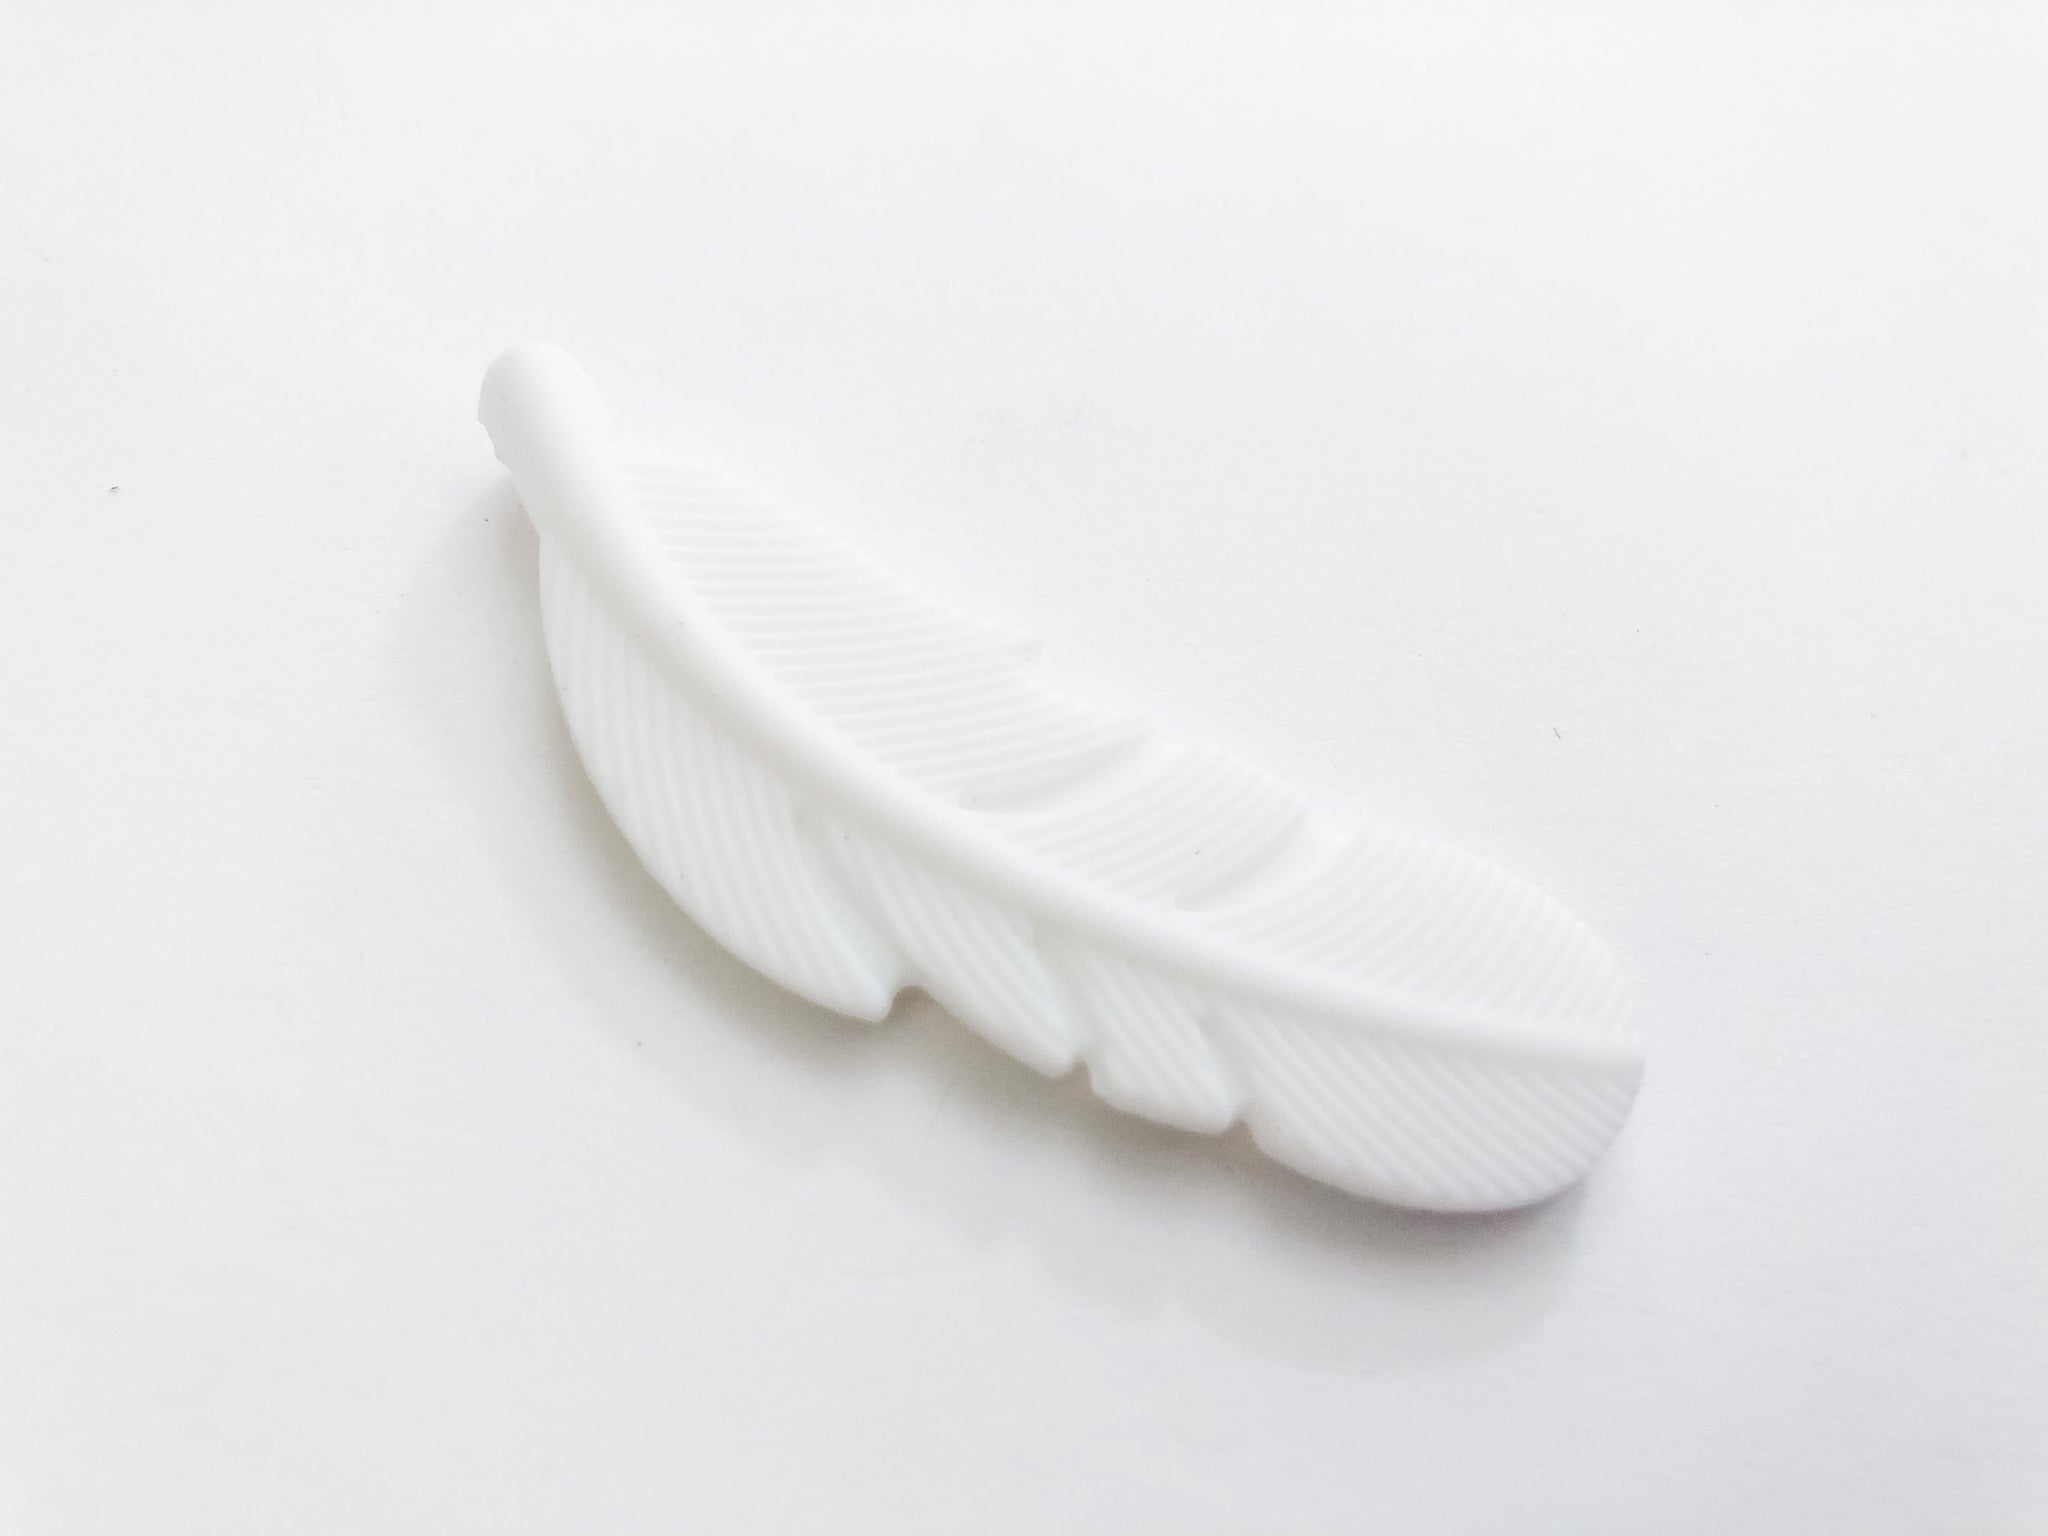 White Silicone Feather Pendant Beads - Bulk Silicone Beads Wholesale - DIY Jewelry